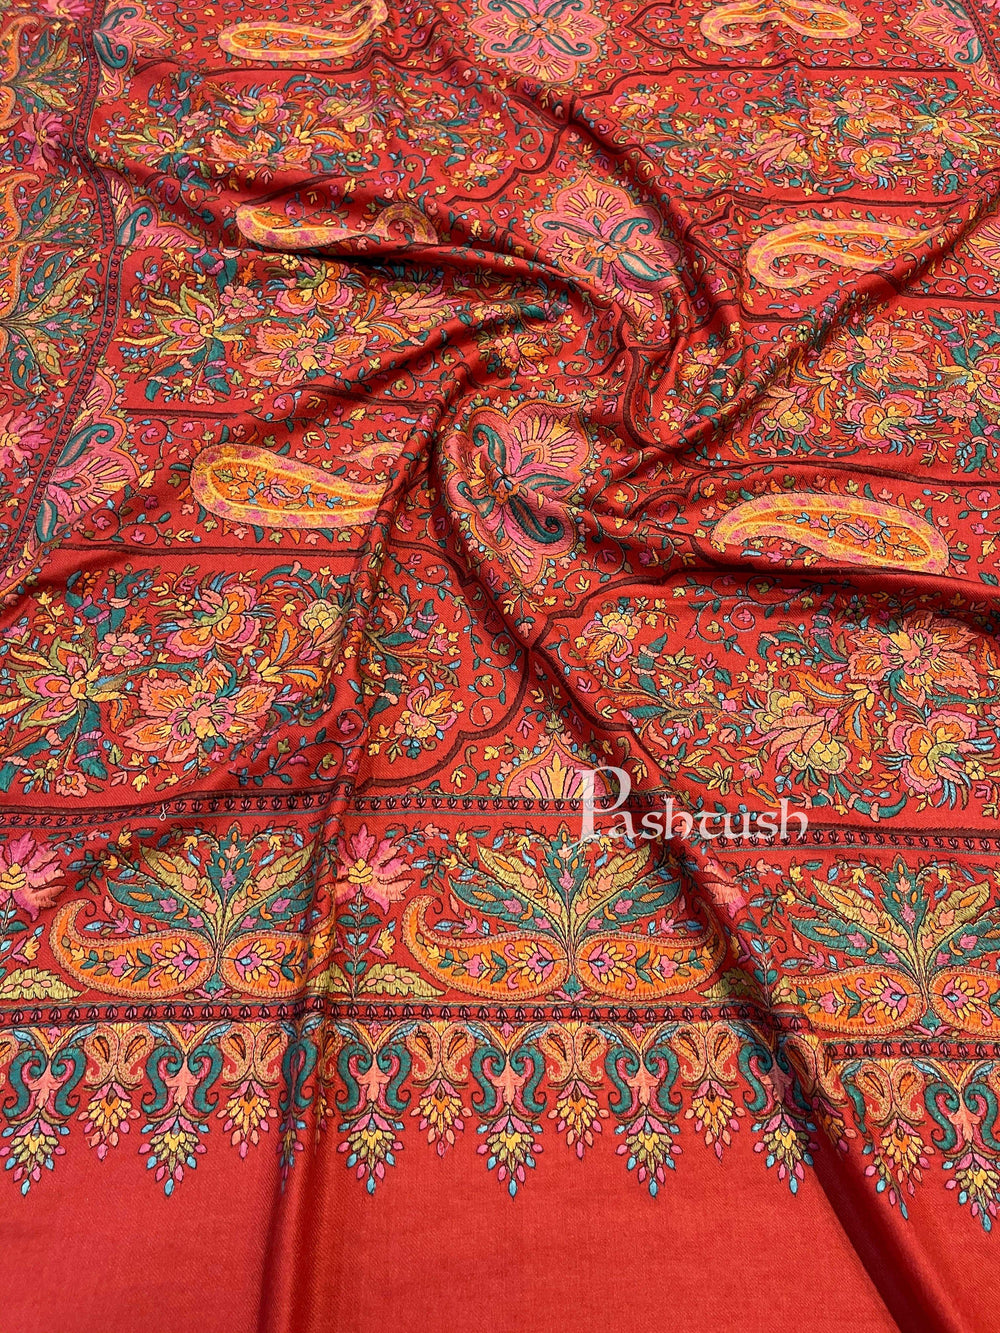 Pashtush India 100x200 Pashtush Womens Papier-mâché Embroidered Shawl, Fine Wool with Silky Embroidery, Scarlet Red